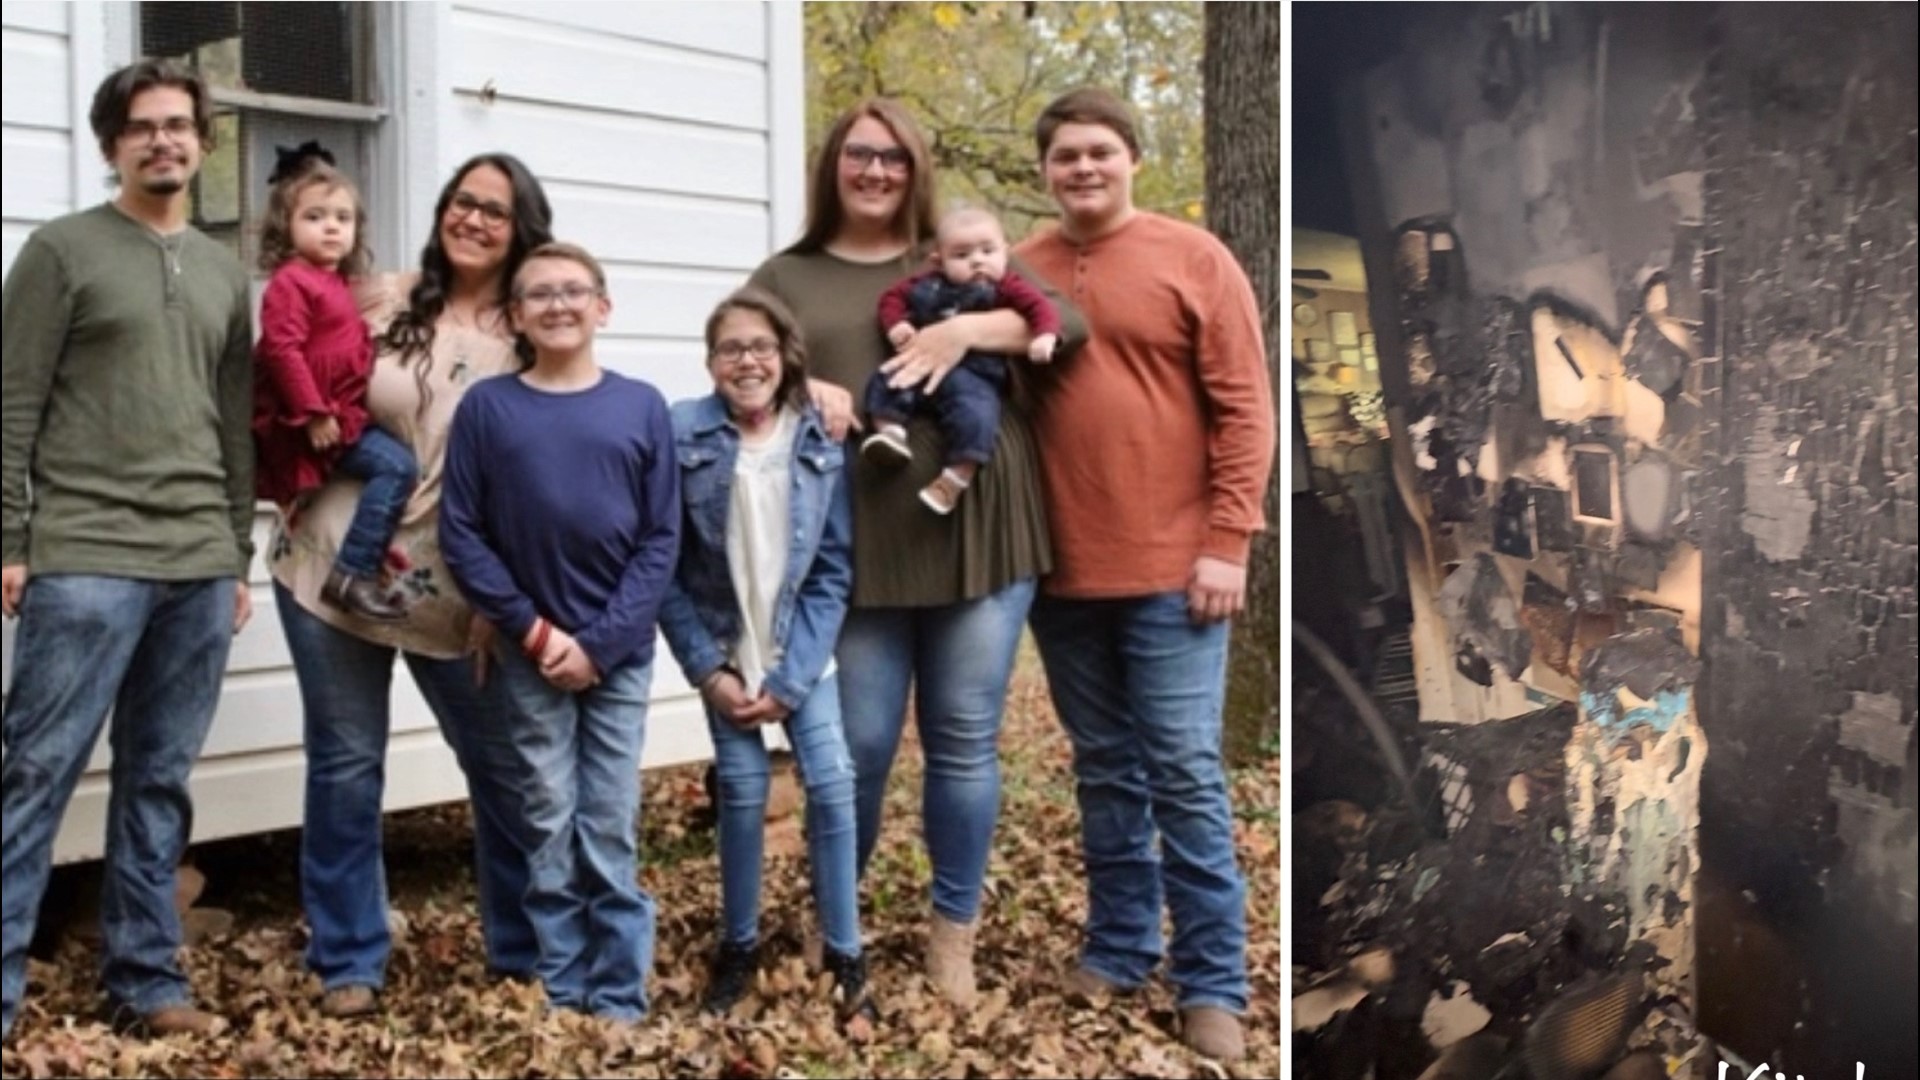 The Bowman family of eight is without a home after a dryer fire destroyed their house and everything in it.